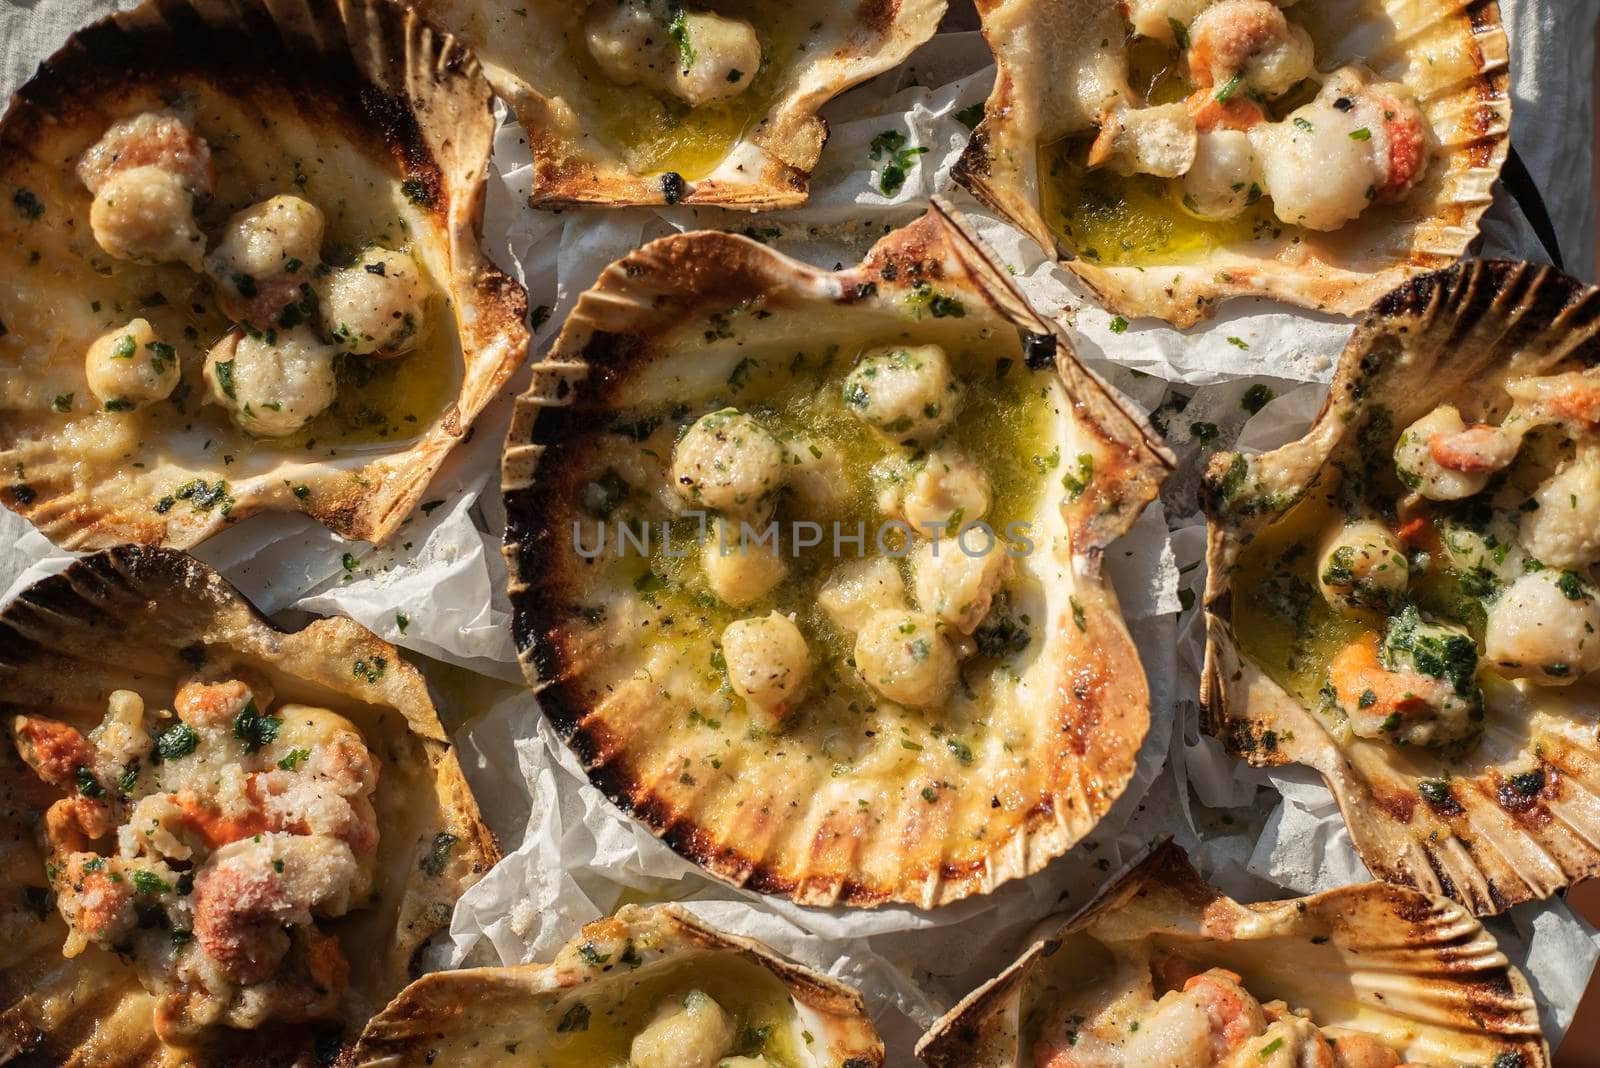 Detail of scallops food 4 by pippocarlot